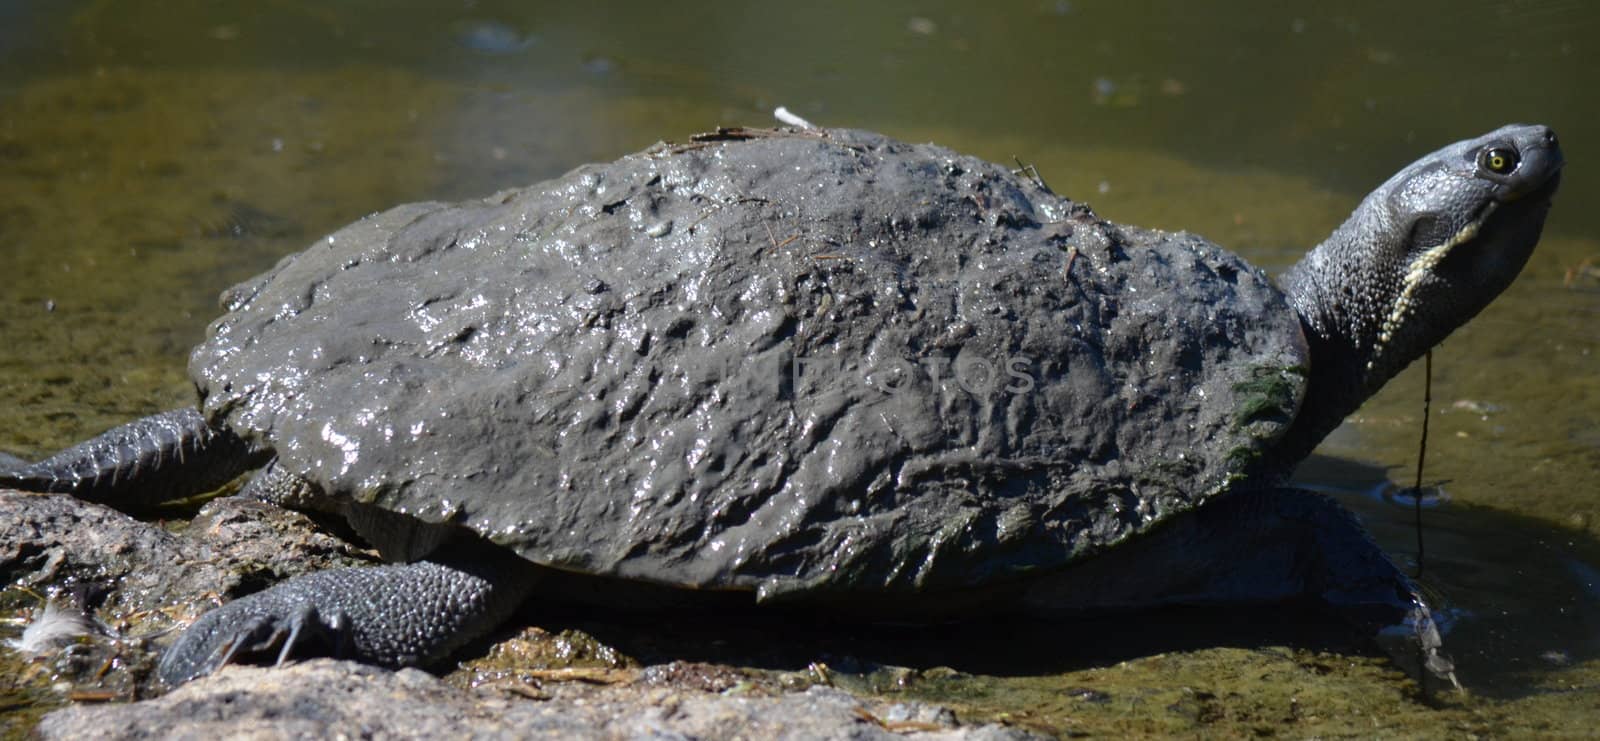 Muddy turtle resting on a rock in a pond